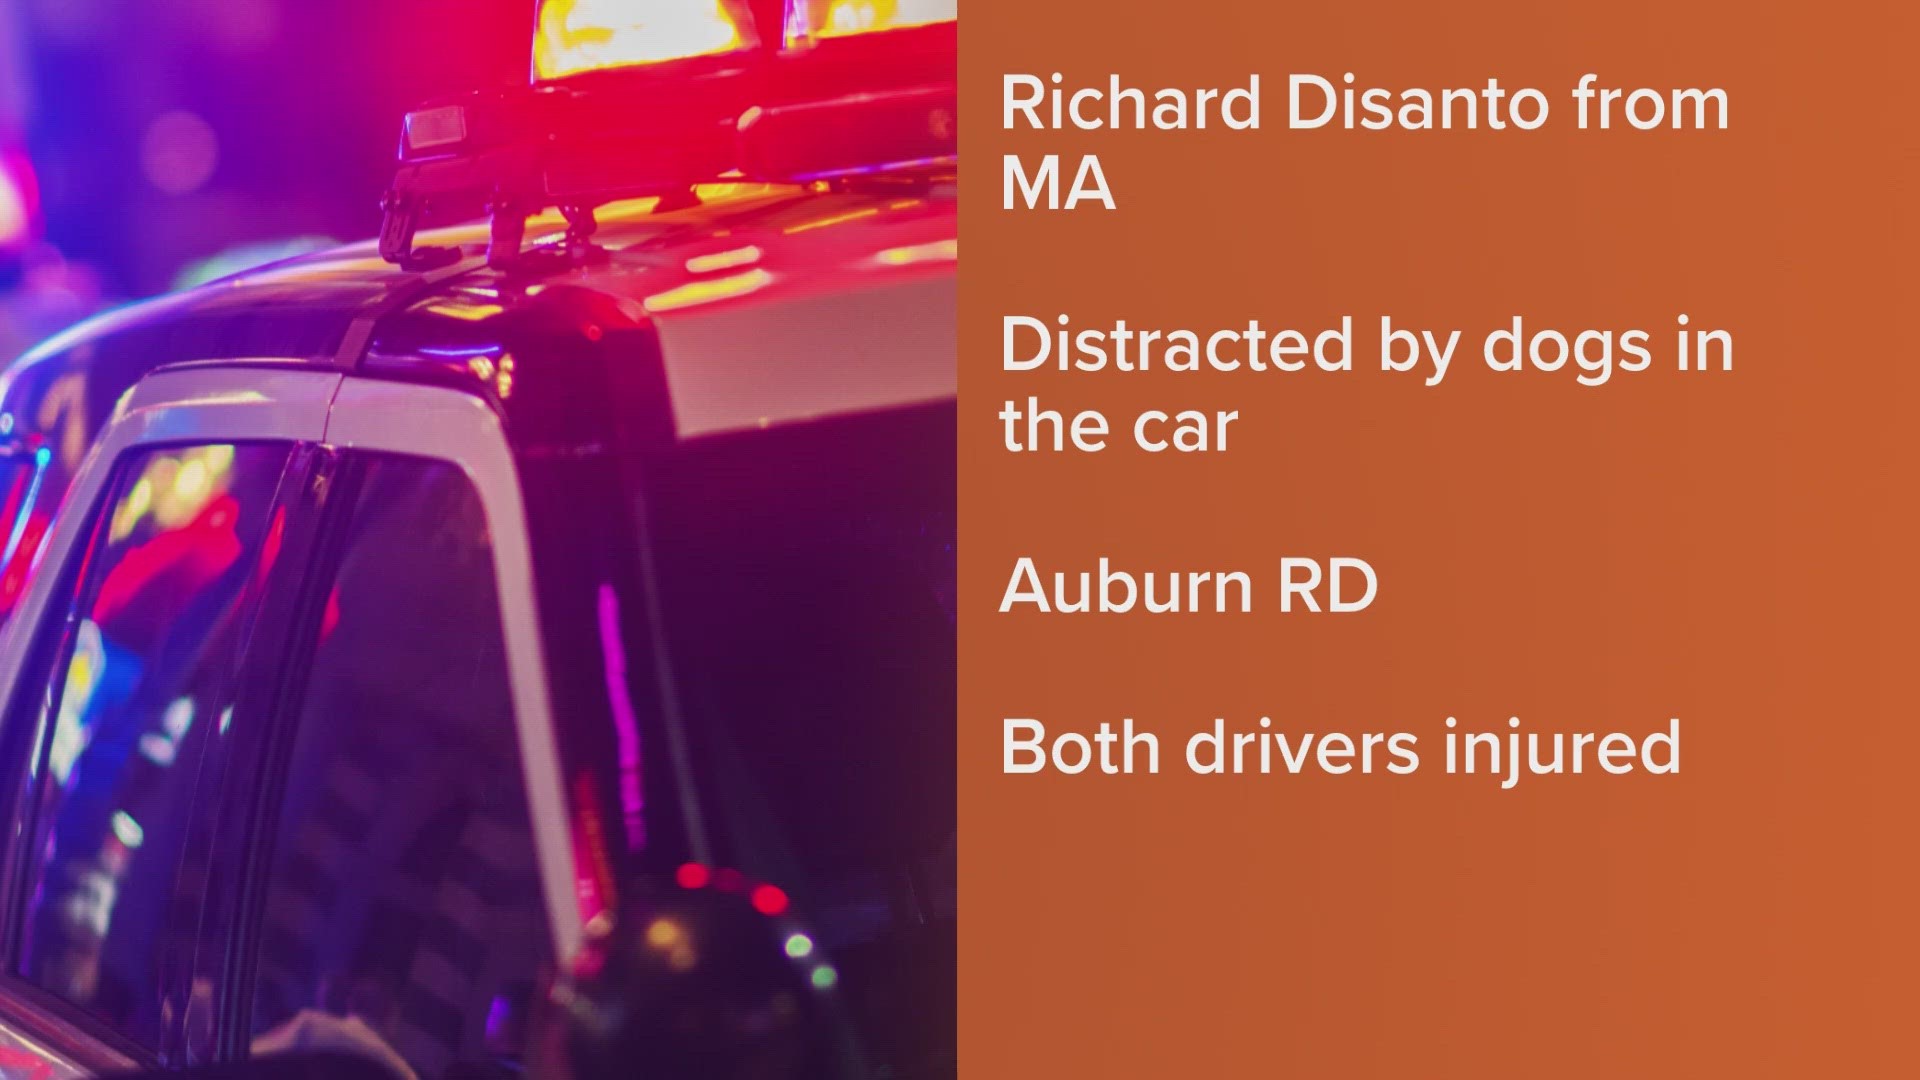 The Androscoggin County Sheriff's Office said Richard Disanto from Massachusetts was driving on 1949 Auburn Road when he crossed the center line and hit another car.